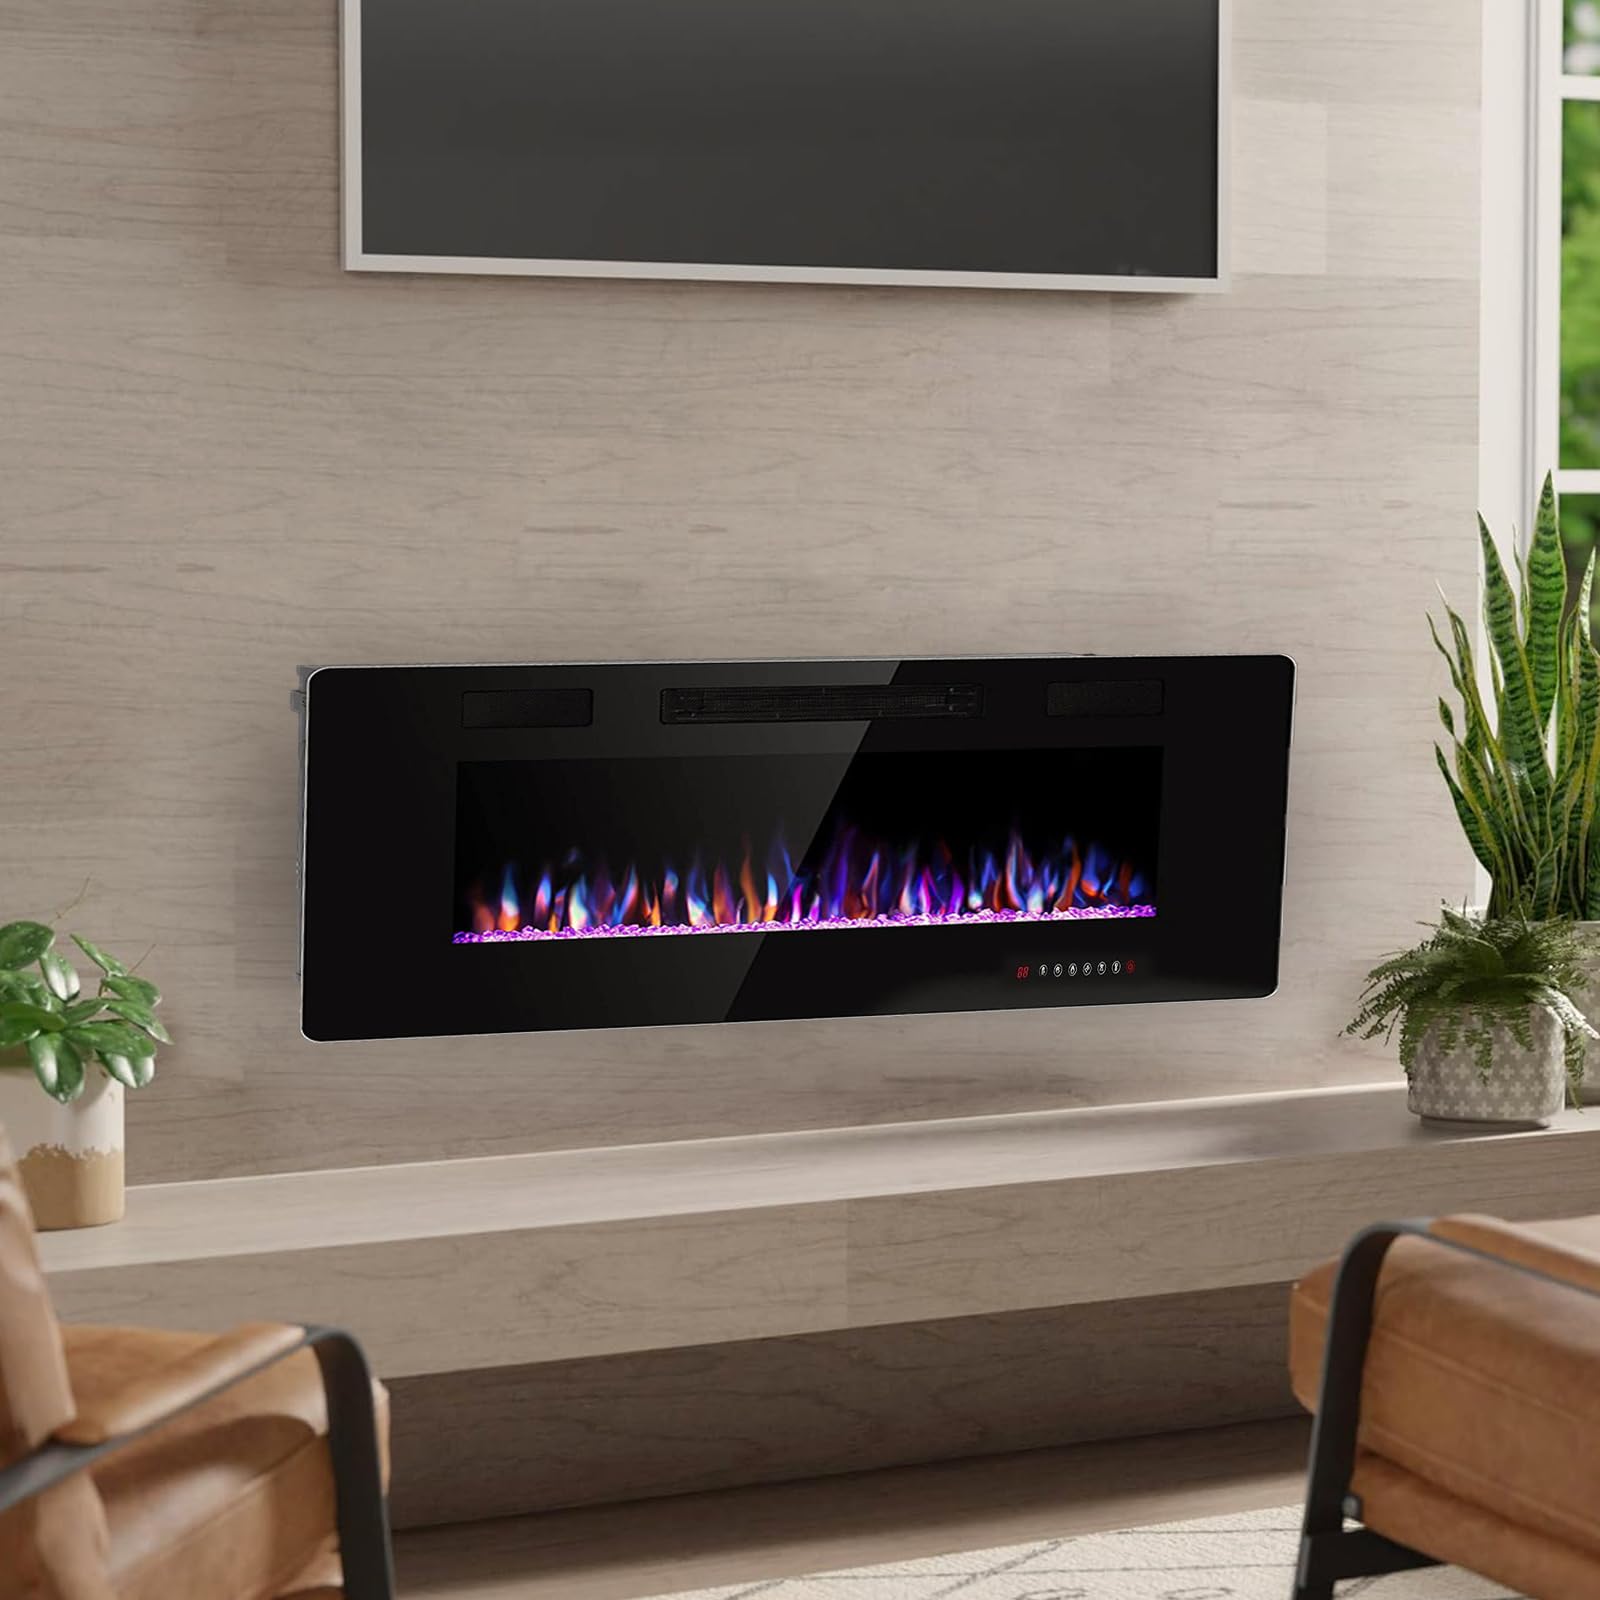 ZAFRO 50” Electronic Fireplace with Control Remote, 750/1500W Heat,12 Flame and Crystal Colors, Electronic Fireplace Heater with overheating Protection, Below 45 dB